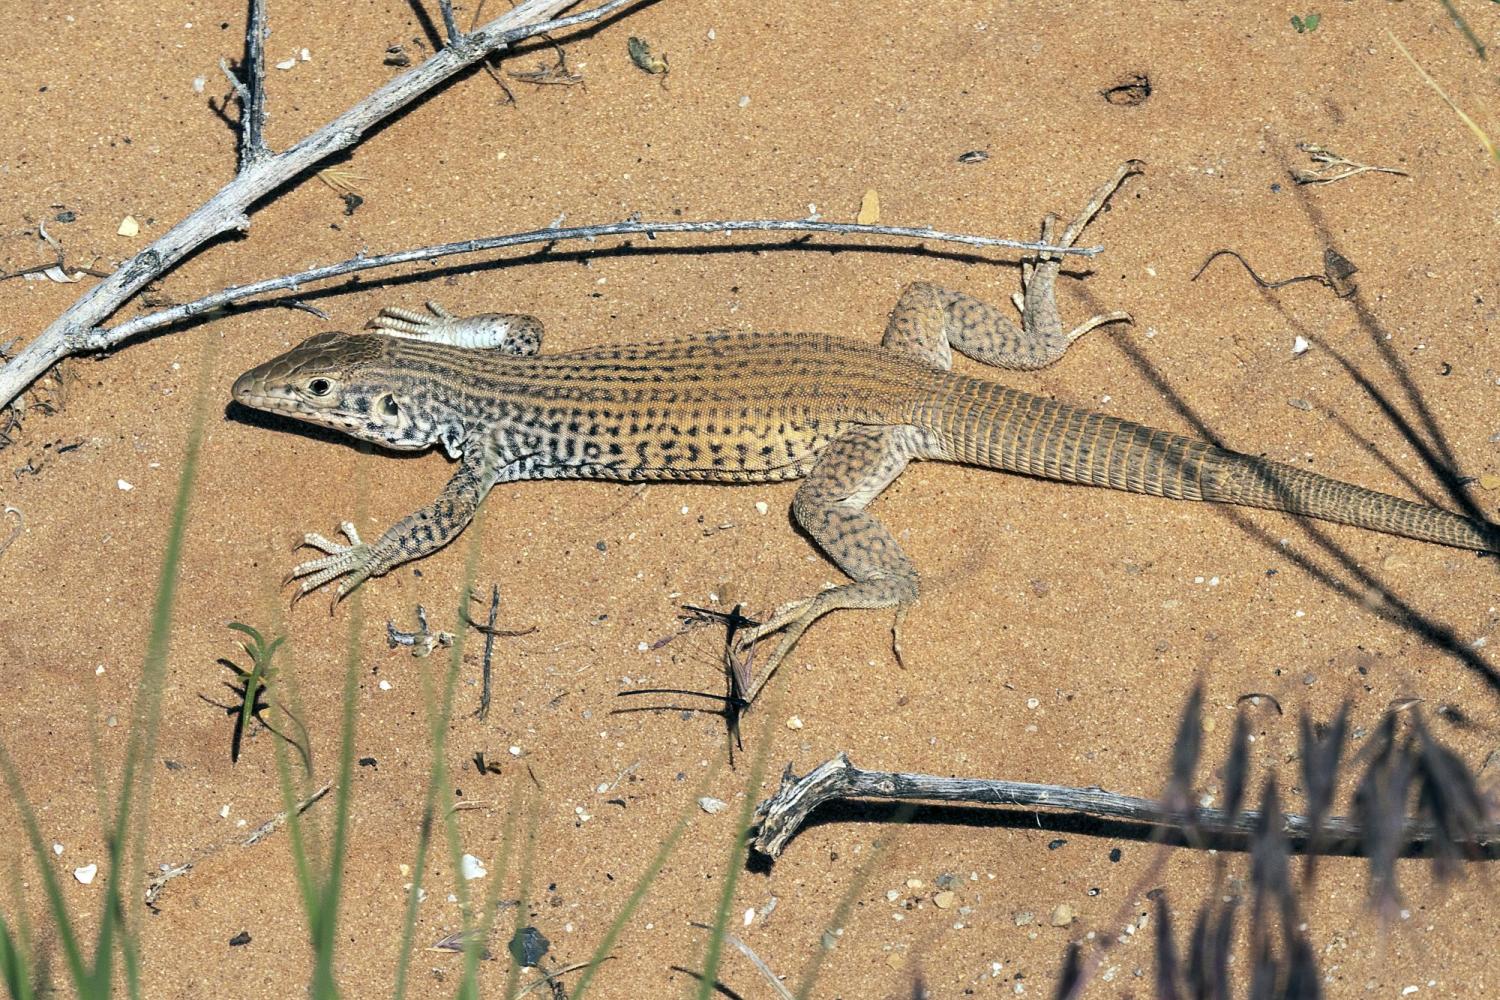 Plateau Tiger Whiptail